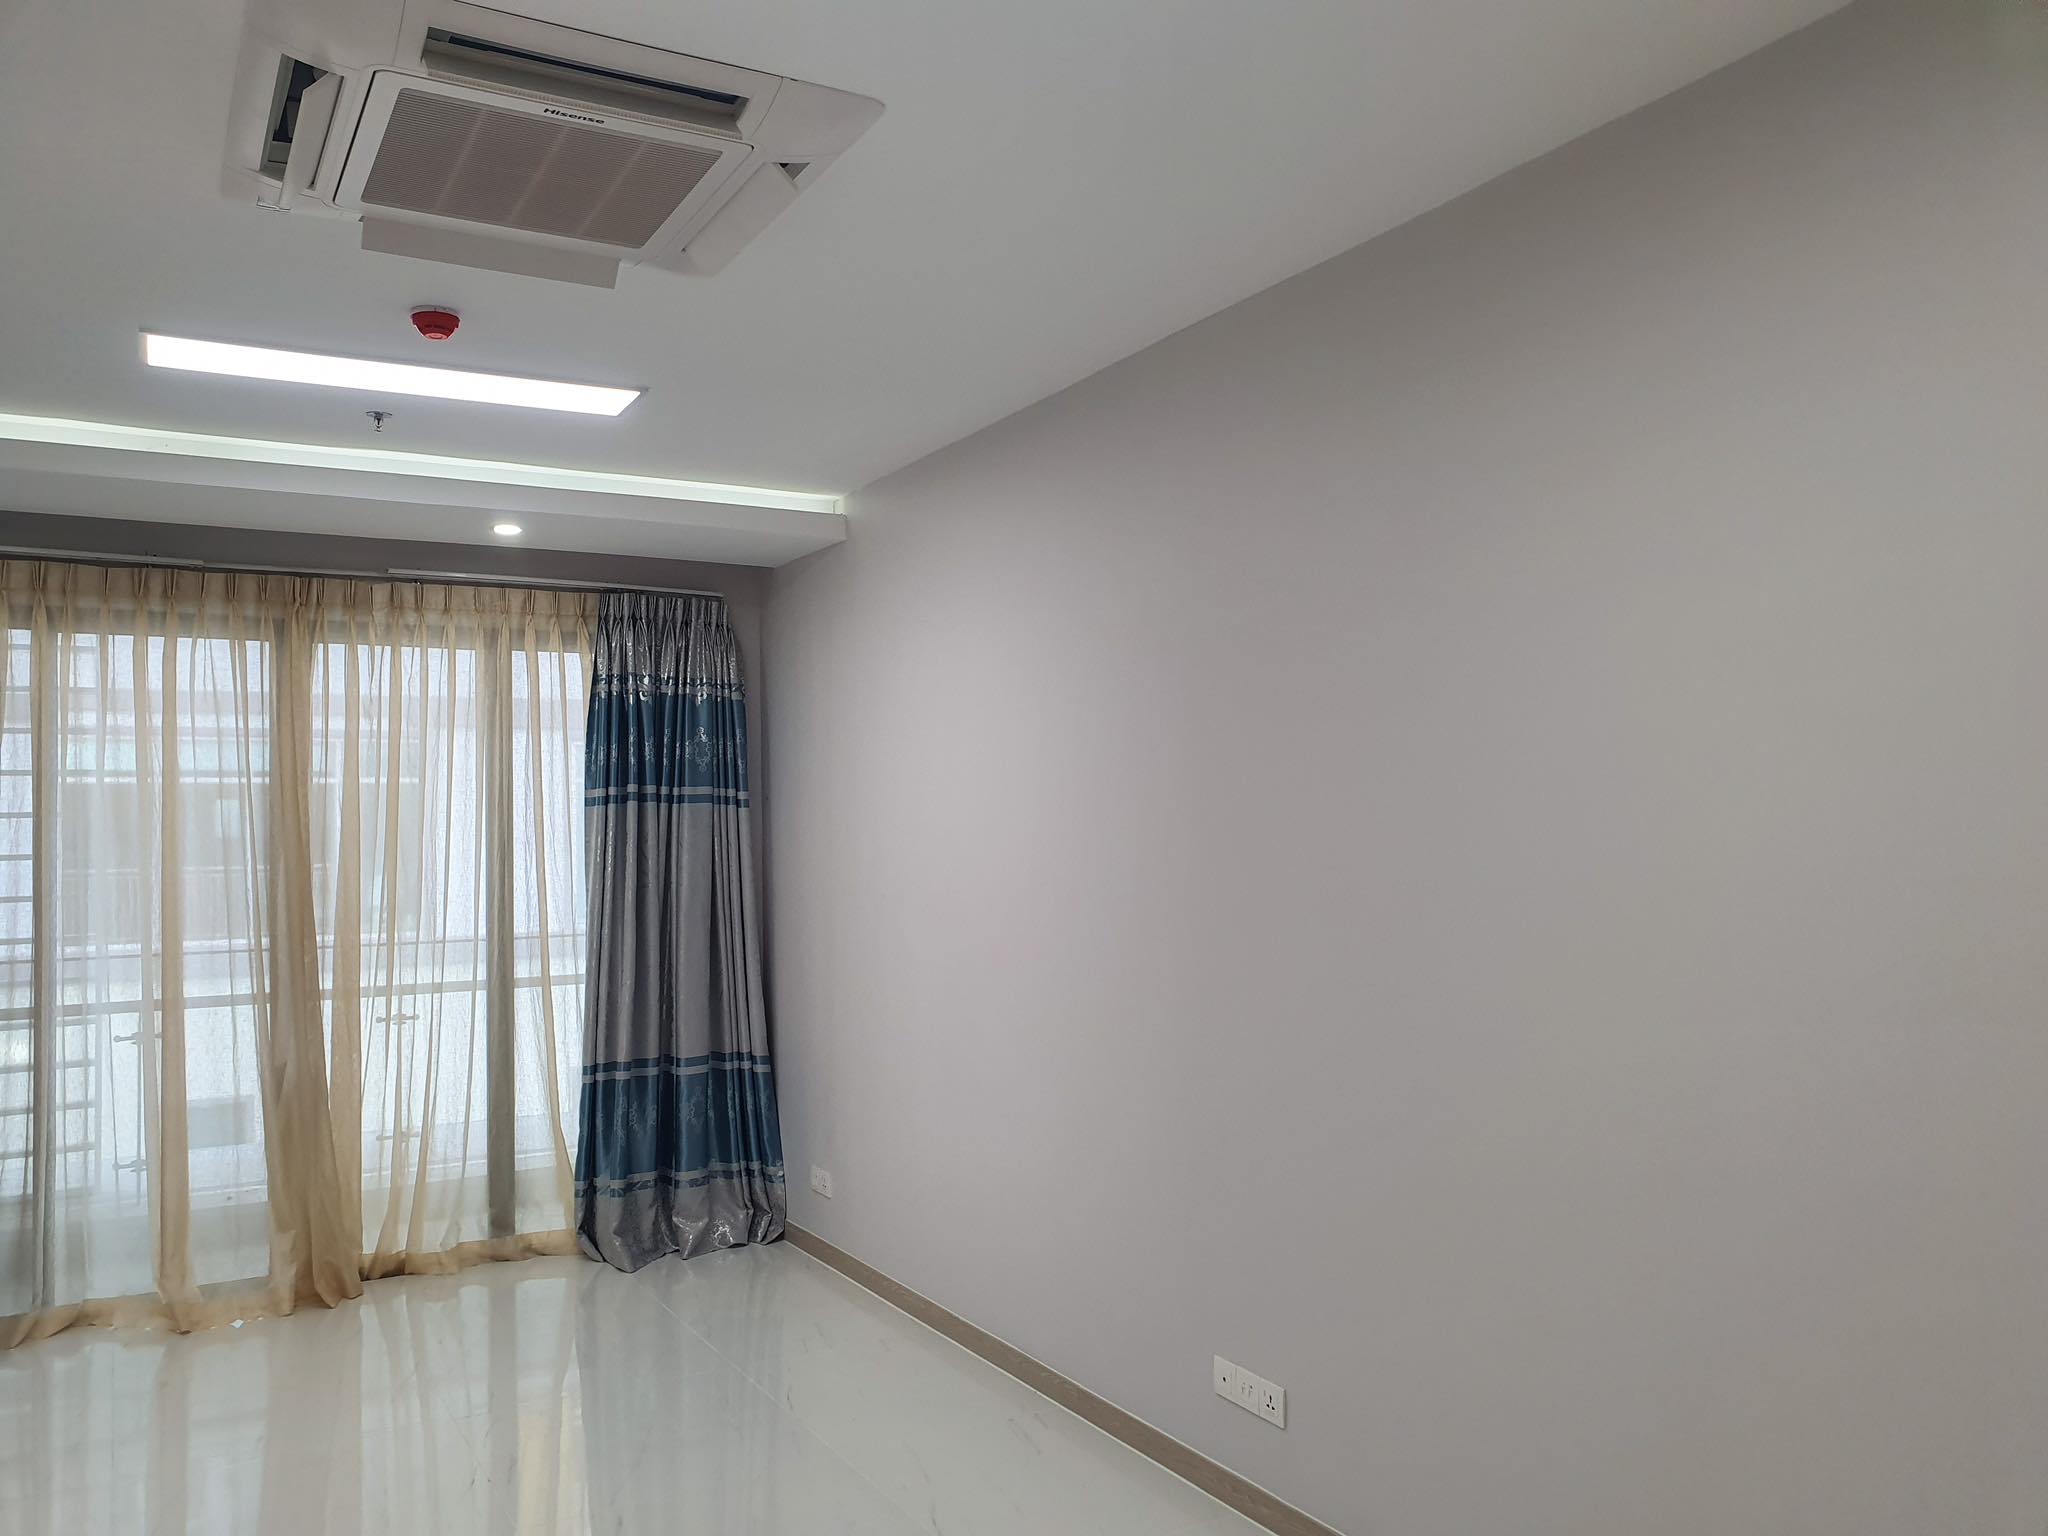 45m2 Small Home Small Office for rent, at Olympia C7 located in central of Phnom Penh City!